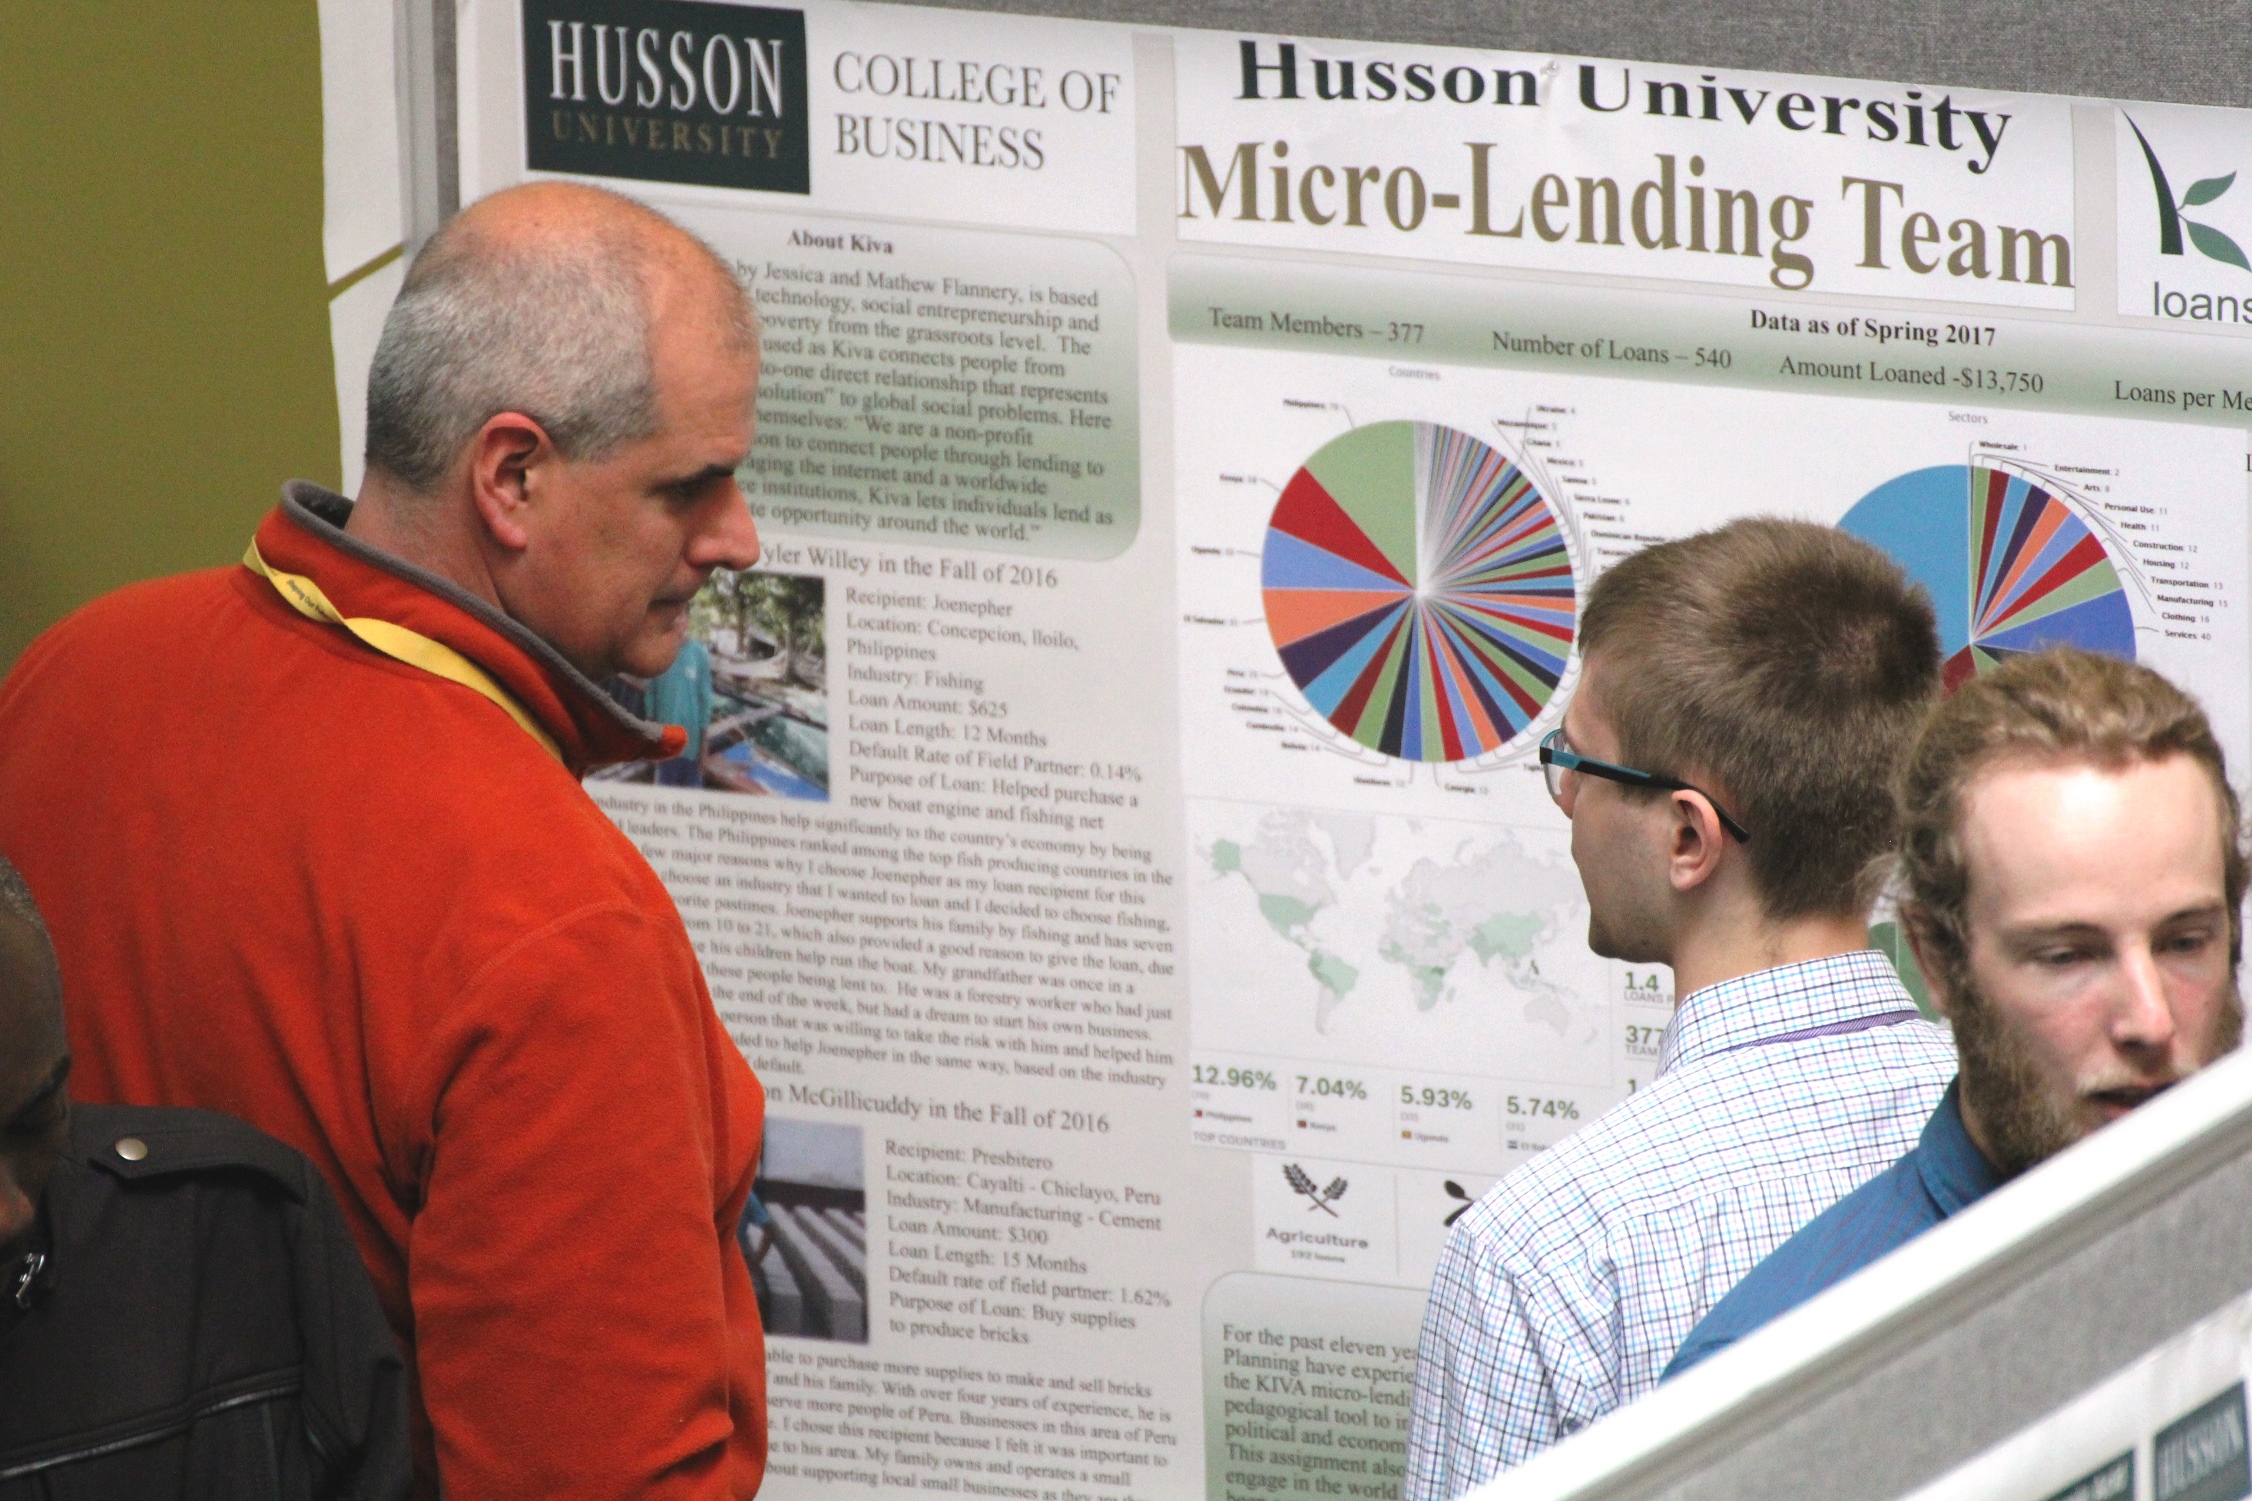 Research and Scholarship Day on the campus of Husson University